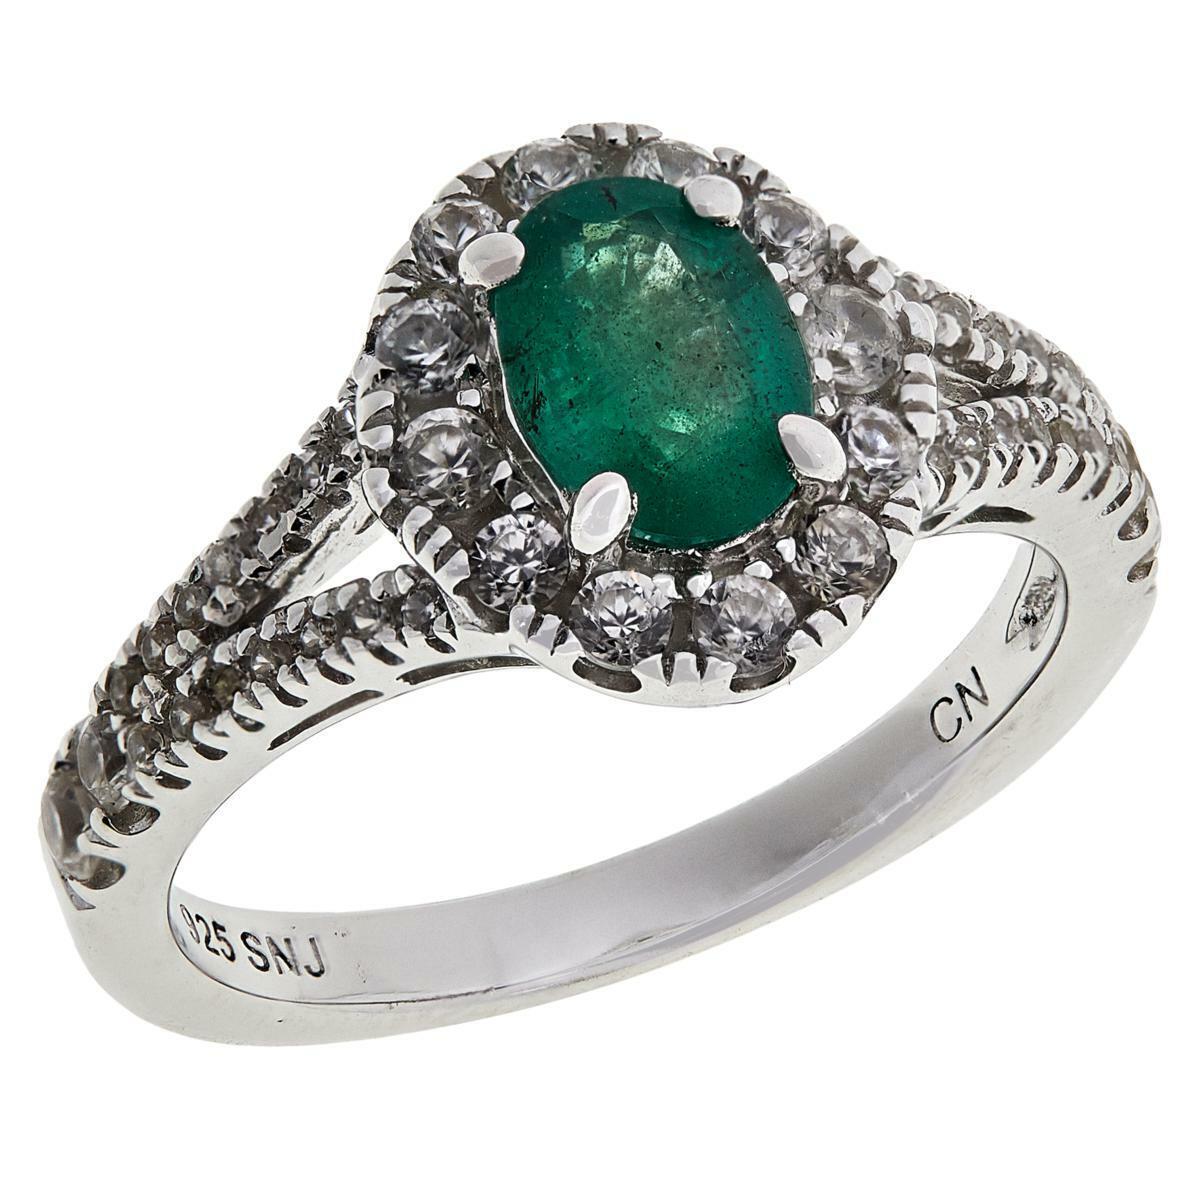 Rarities Sterling Silver Oval Emerald & White Zircon Halo Design Ring, Size 7